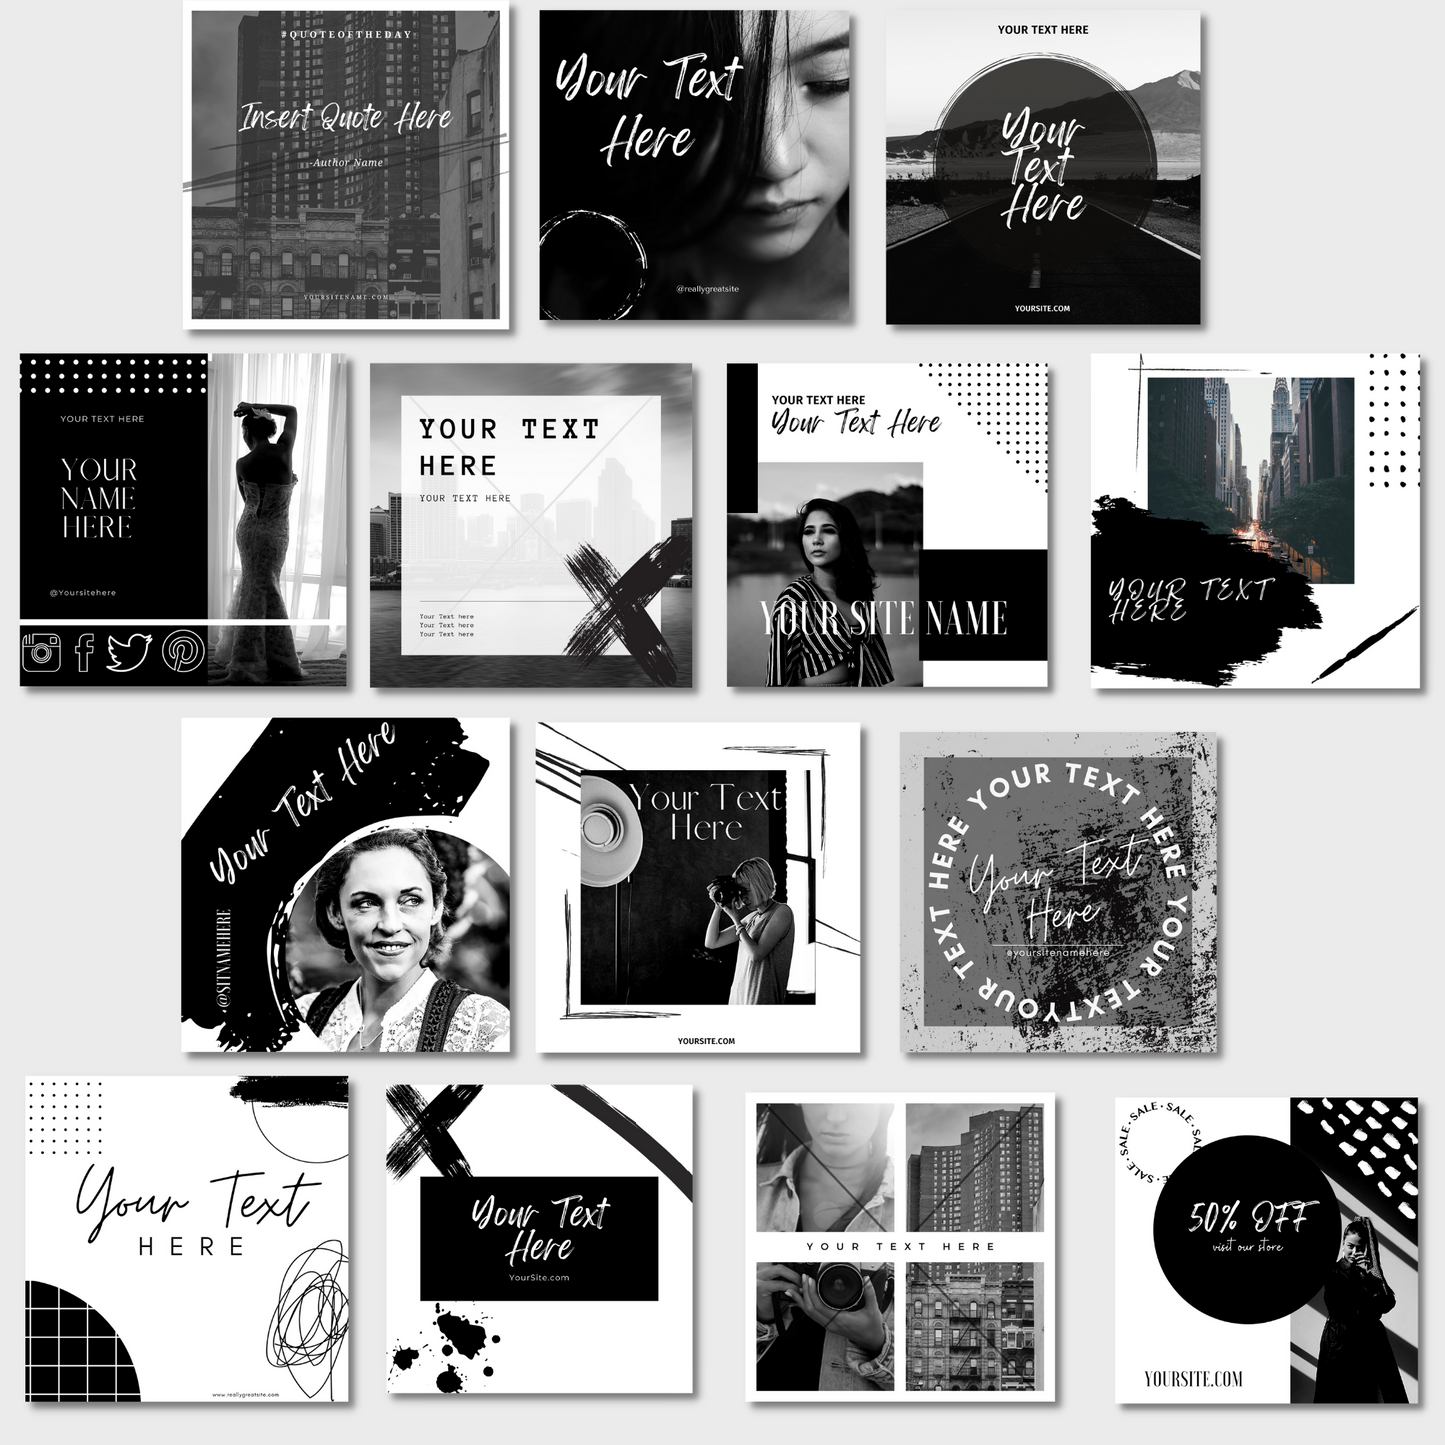 20 Black and White Instagram Post Templates | Editable in Canva | IG Engagement | Social Media Posts